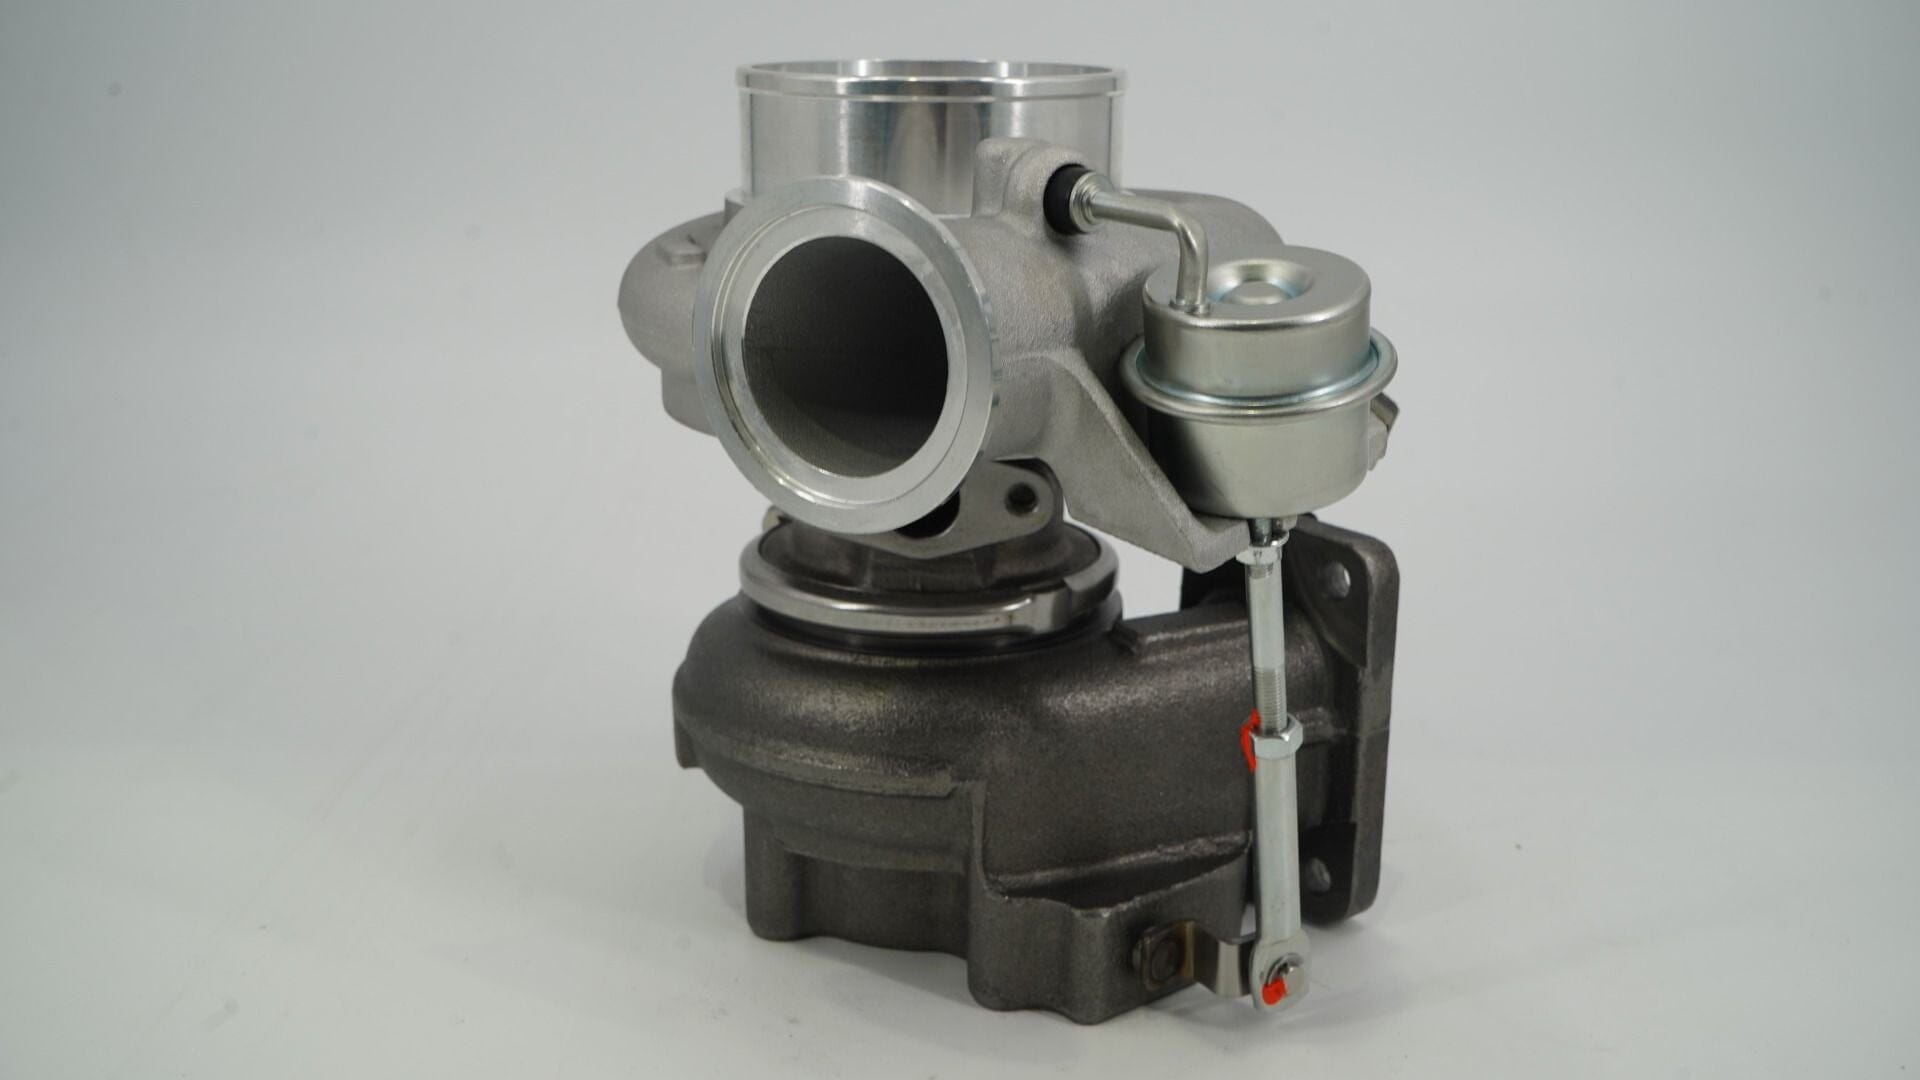 HY35 Stealth 60 Turbo (1991.5-2002 5.9L Cummins) Turbocharger Calibrated Power 